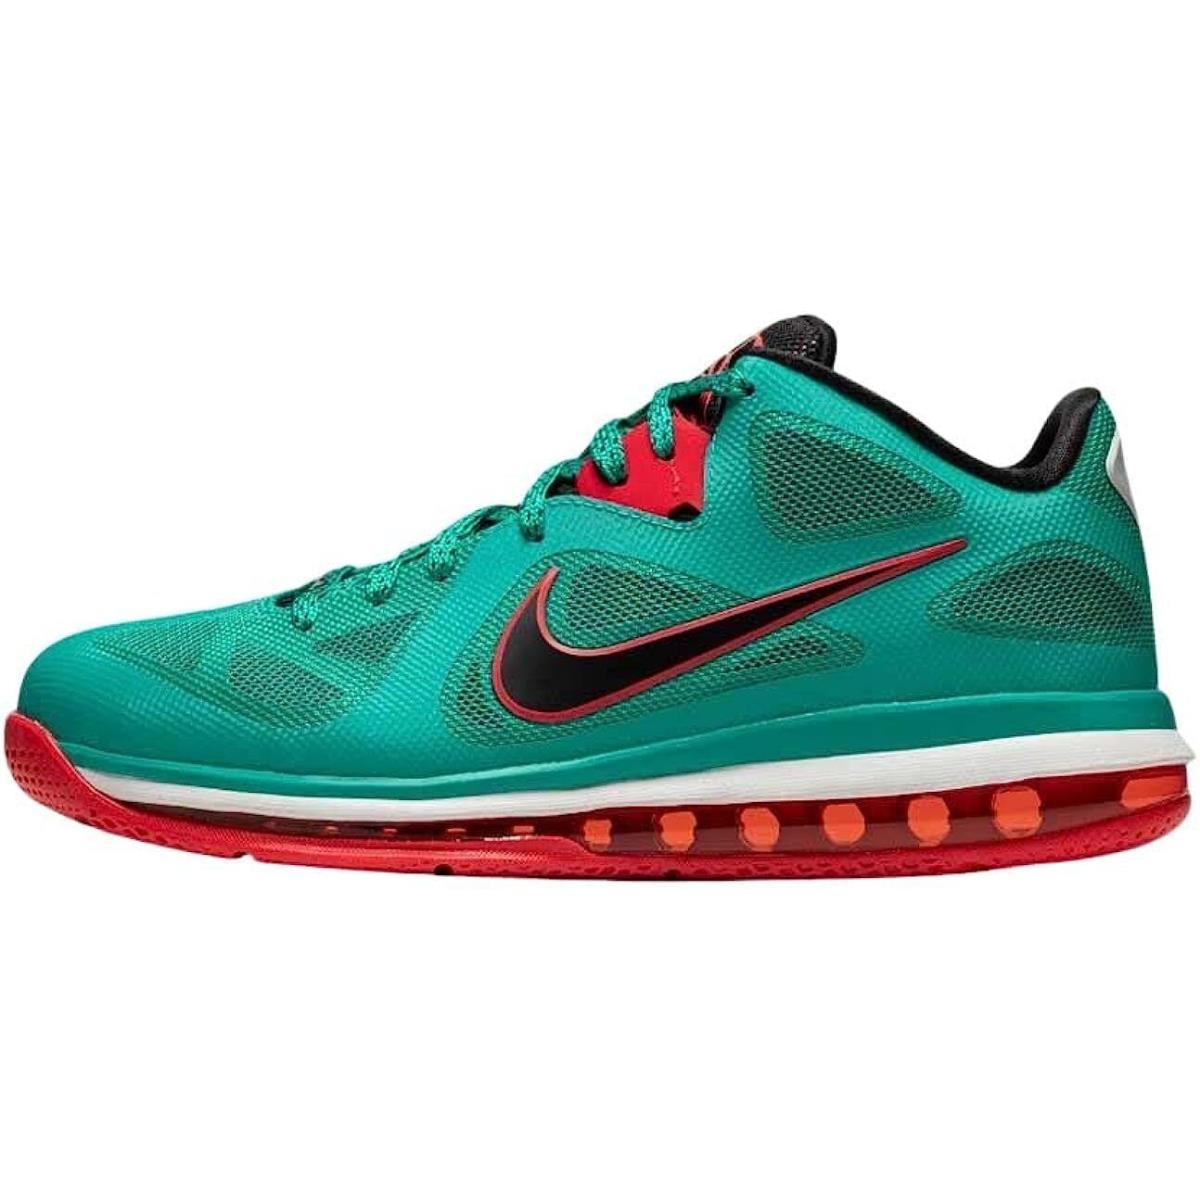 Nike Lebron Ix Low Mens - New Green/Black/Action Red/Whi